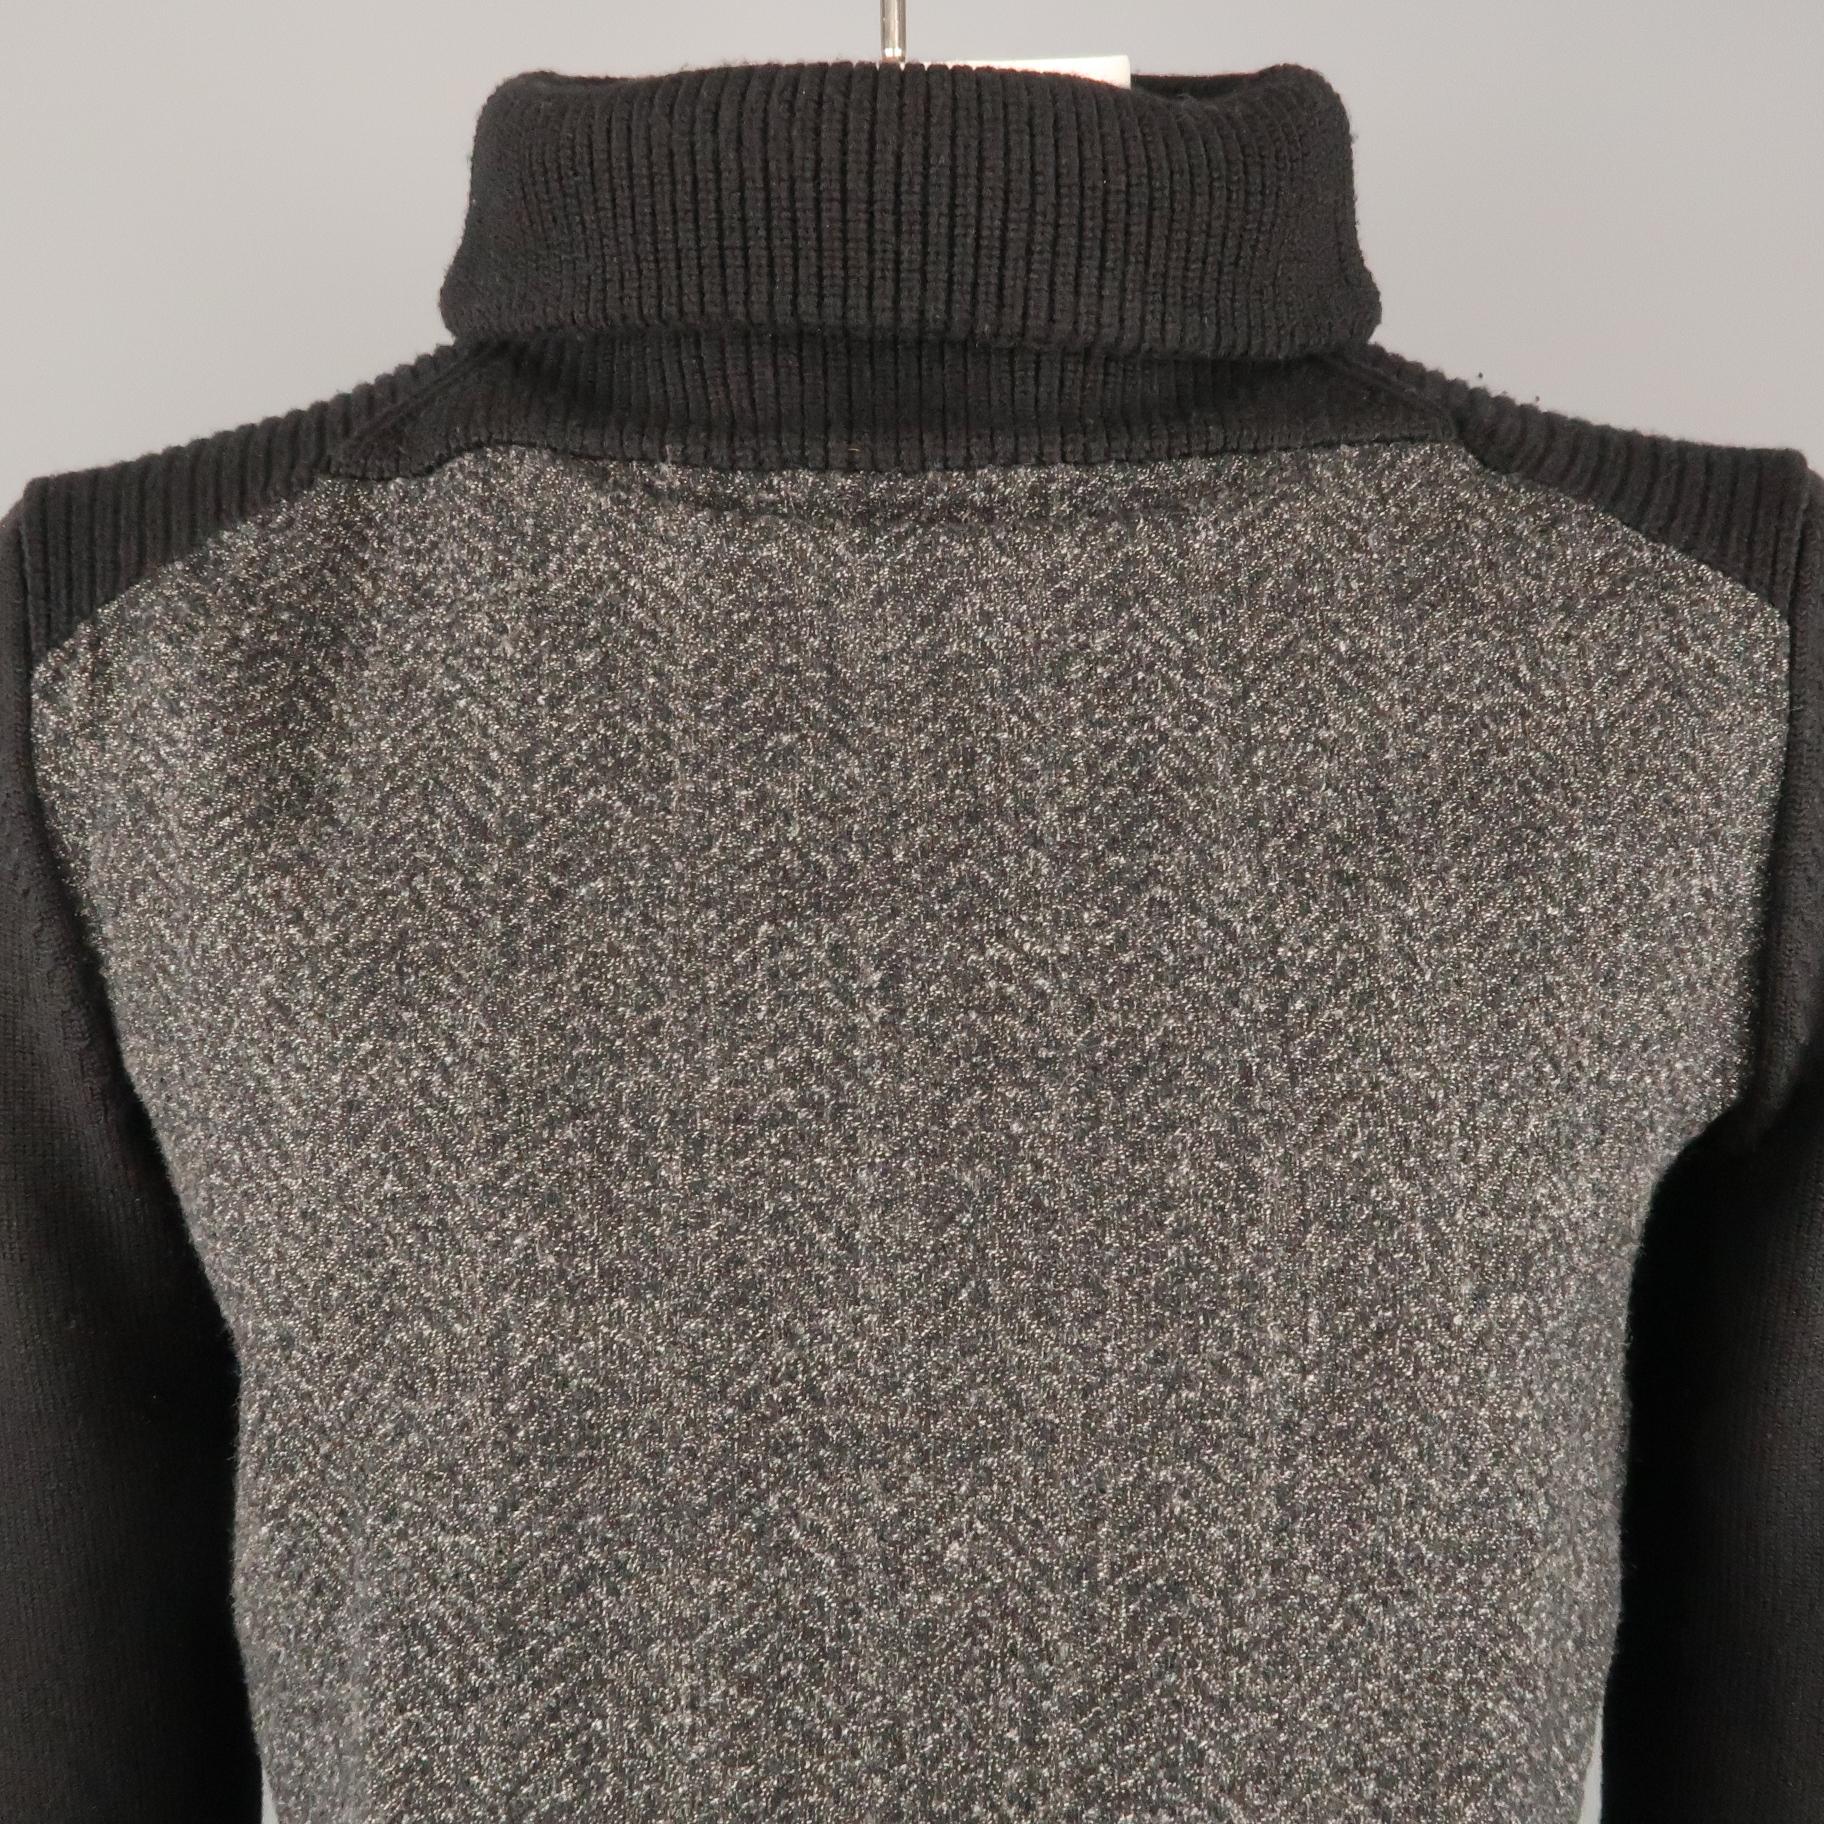 SALVATORE FERRAGAMO turtleneck sweater comes in a black and grey knitted wool featuring a two toned style and long sleeves. Made in Italy.
 
Excellent Pre-Owned Condition.
Marked: L
 
Measurements:
 
Shoulder: 19 in.
Chest: 42 in.
Sleeve: 25 5